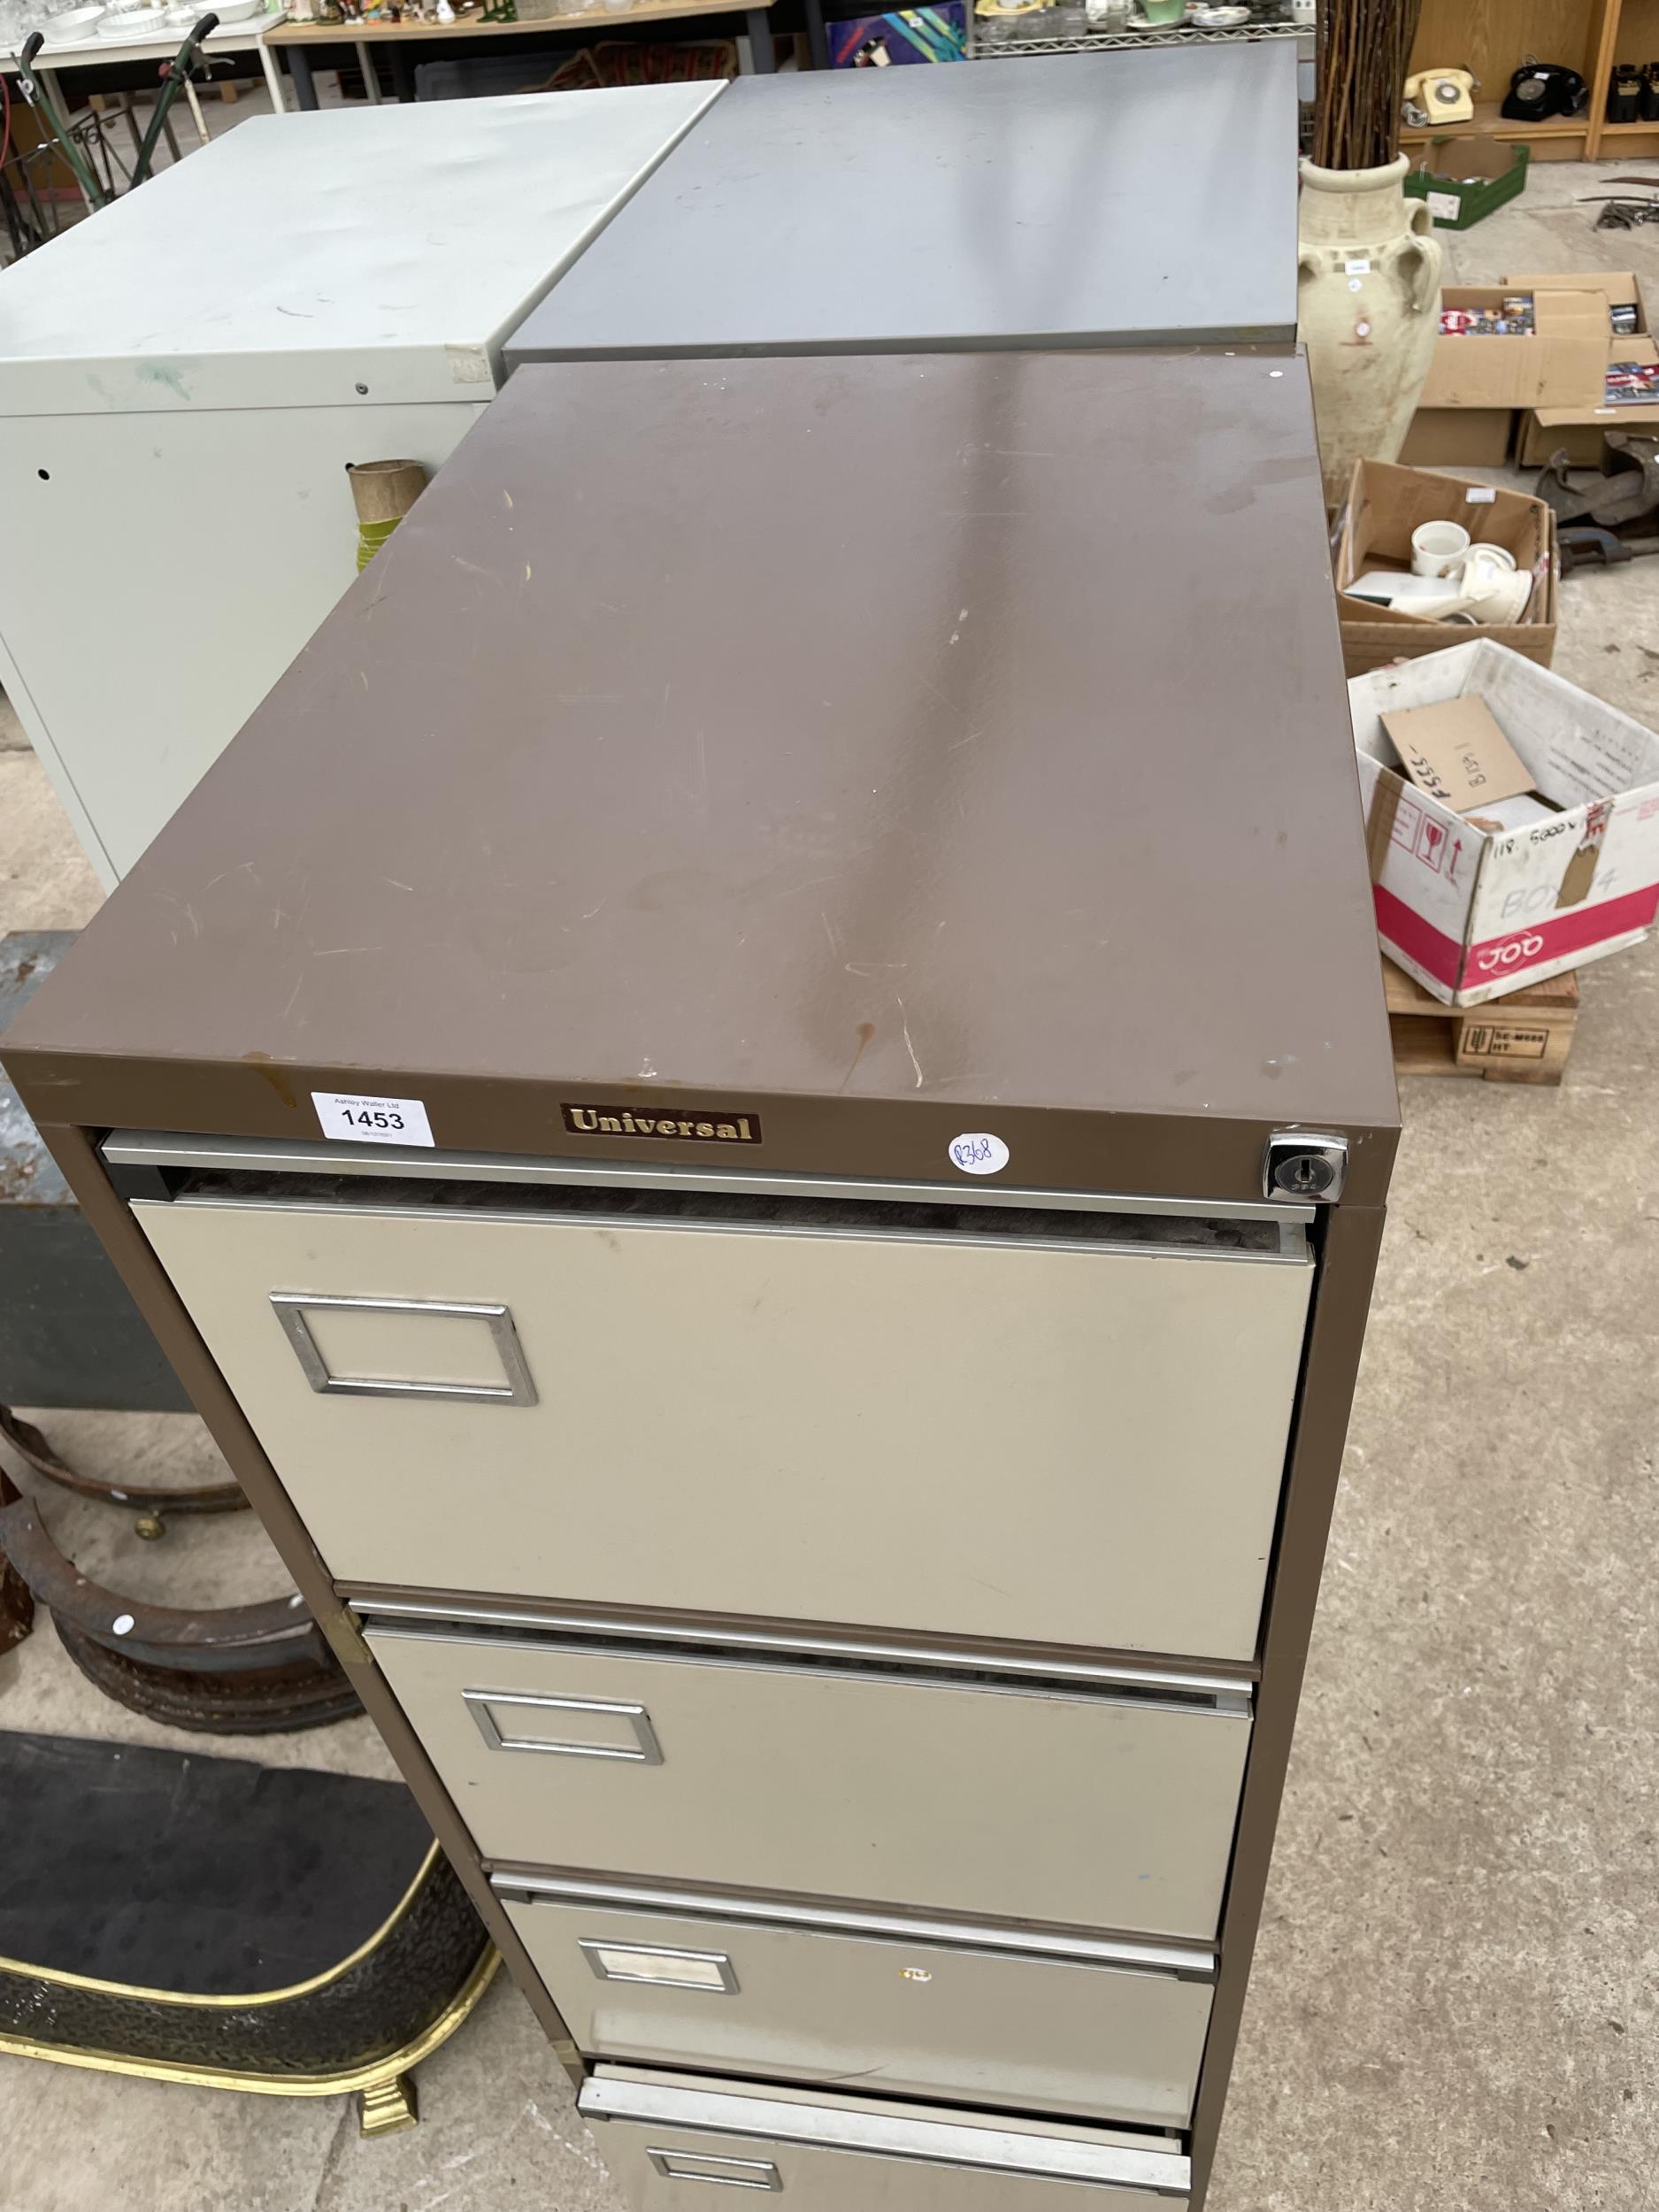 A METAL FOUR DRAWER 'UNIVERSAL' FILING CABINET - Image 2 of 3